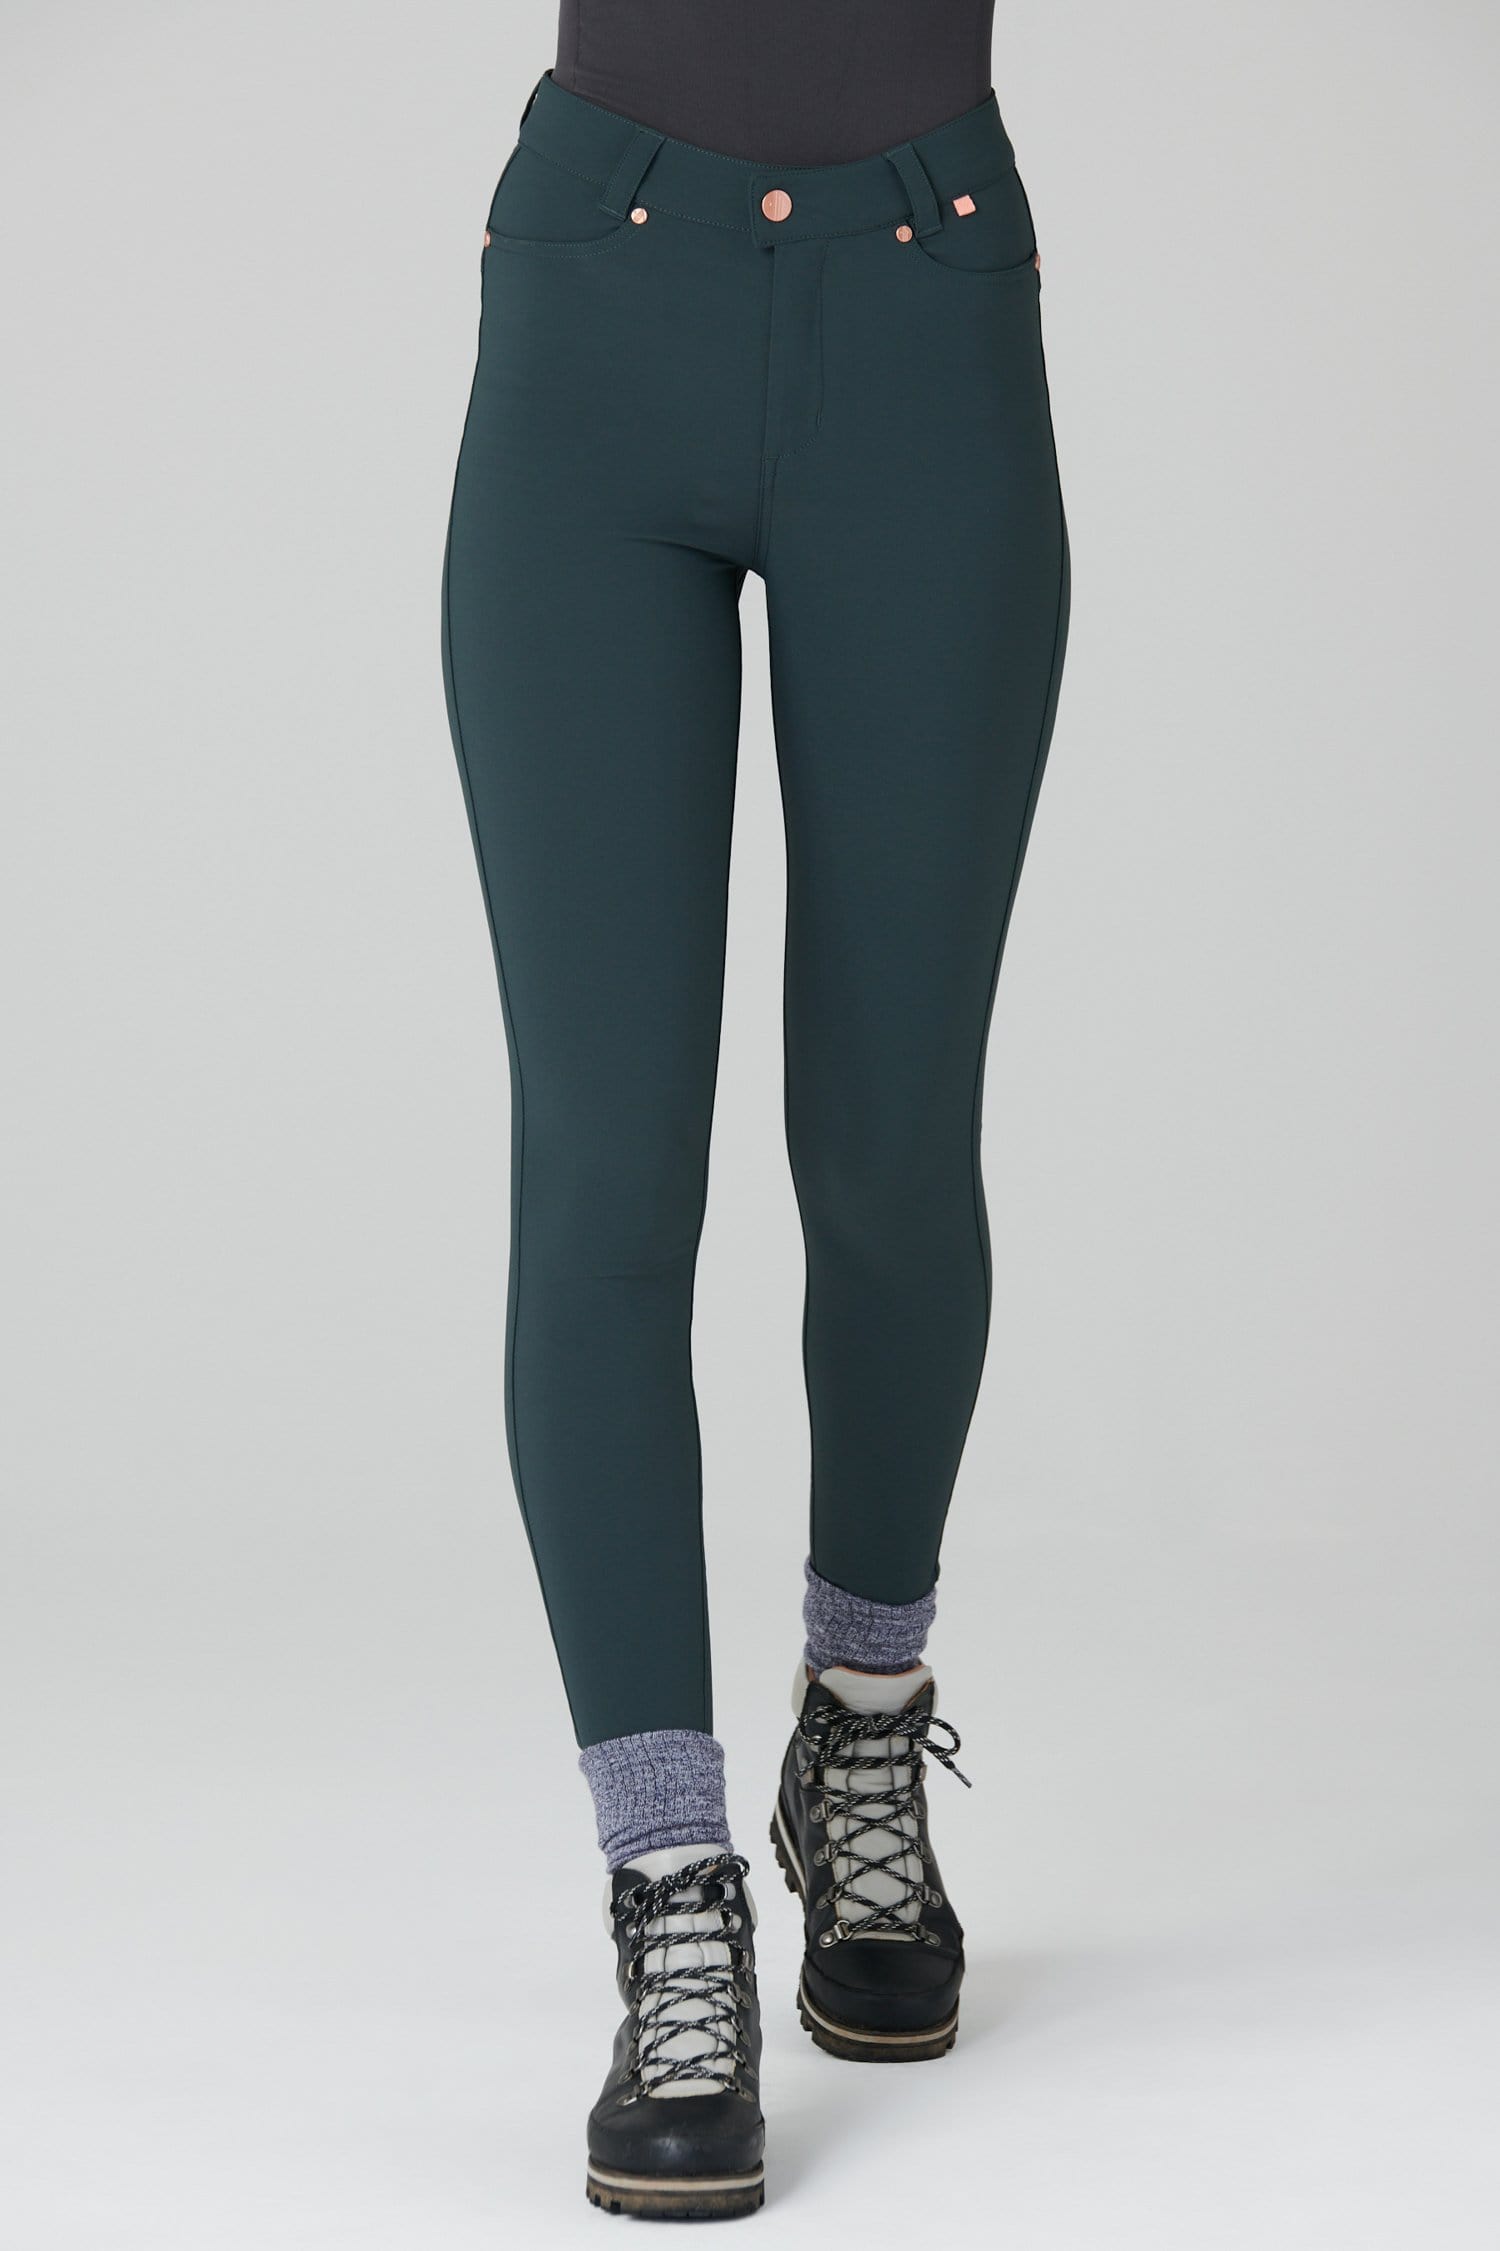 Max Stretch Skinny Outdoor Trousers - Forest Green - 24r / Uk6 - Womens - Acai Outdoorwear